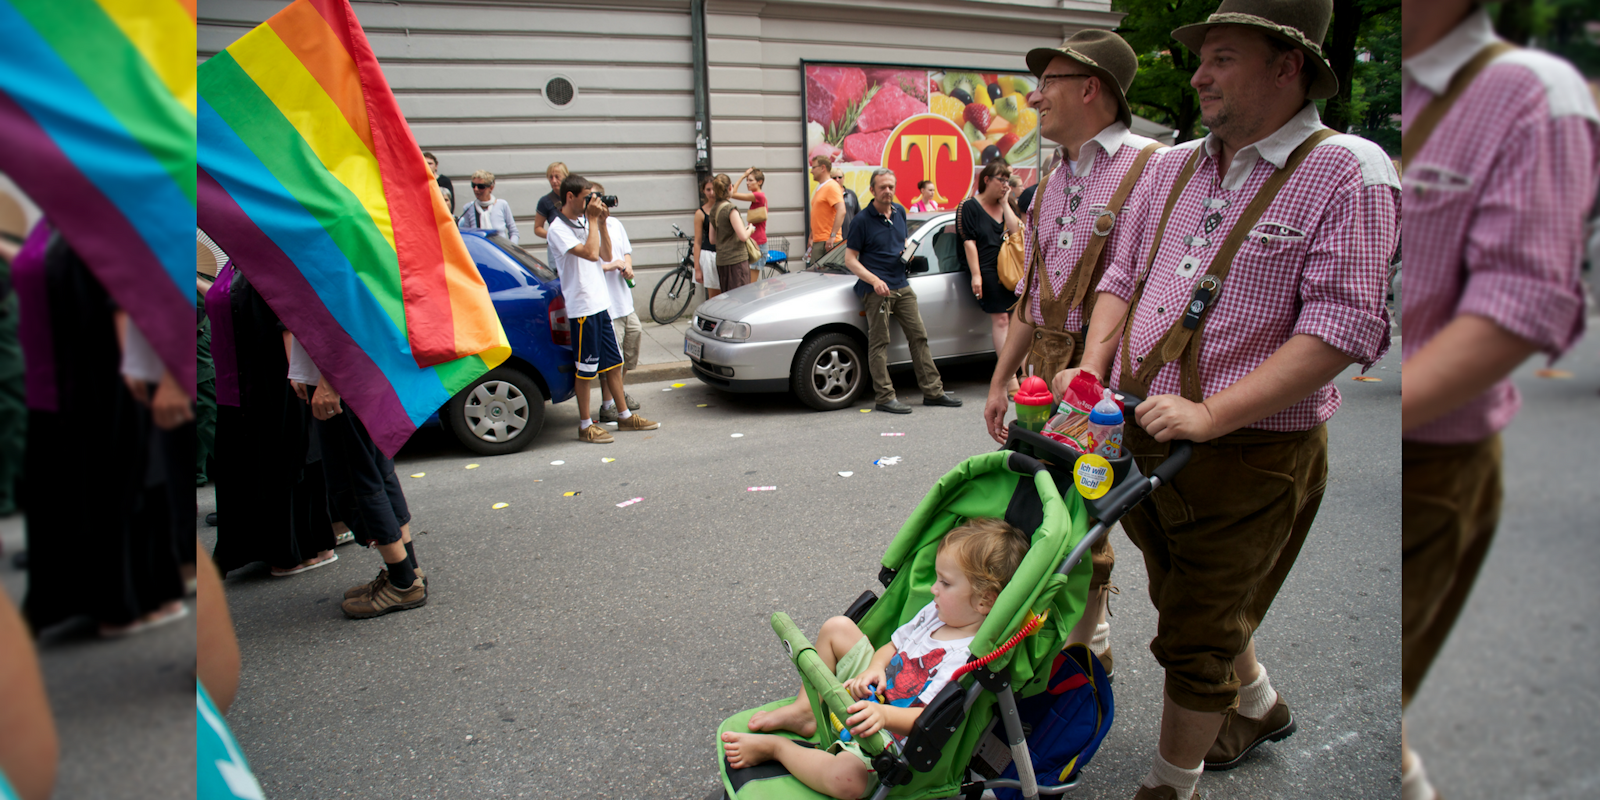 A gay couple and their child participate in a Pride parade in Munich